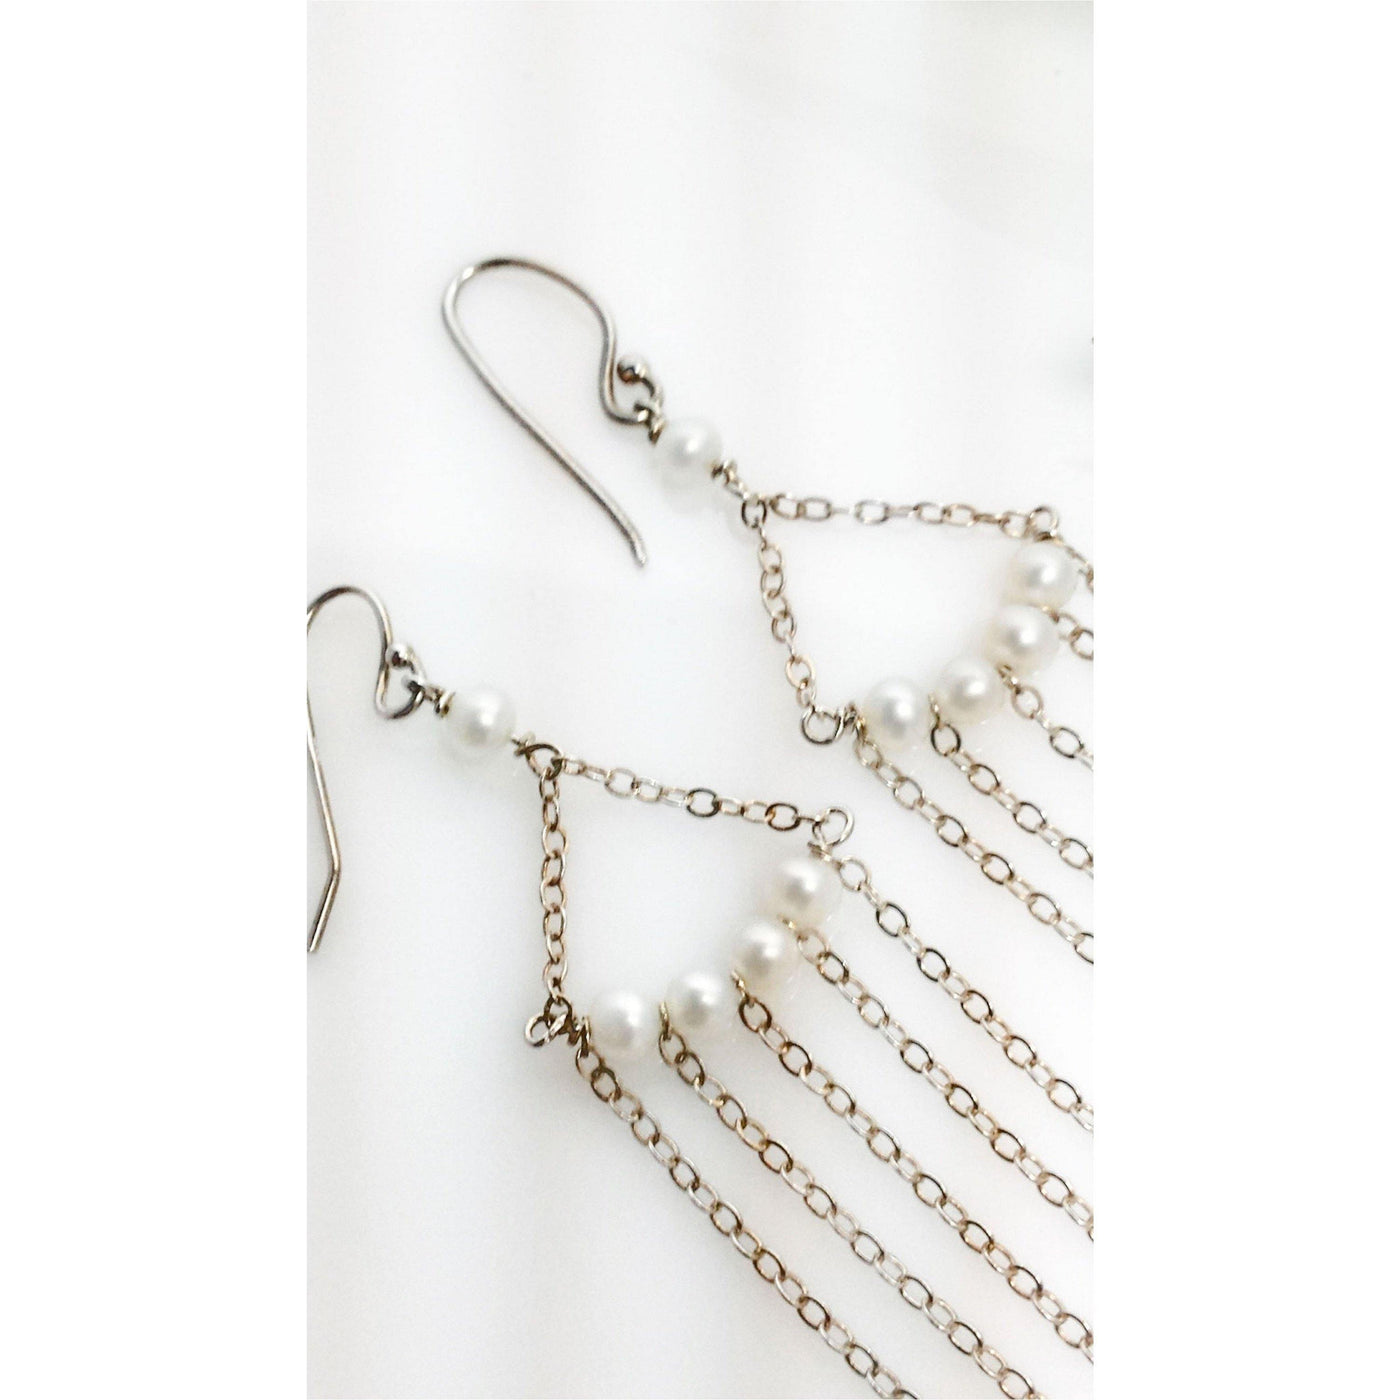 Pearl and sterling chain chandelier earrings - LB Designs